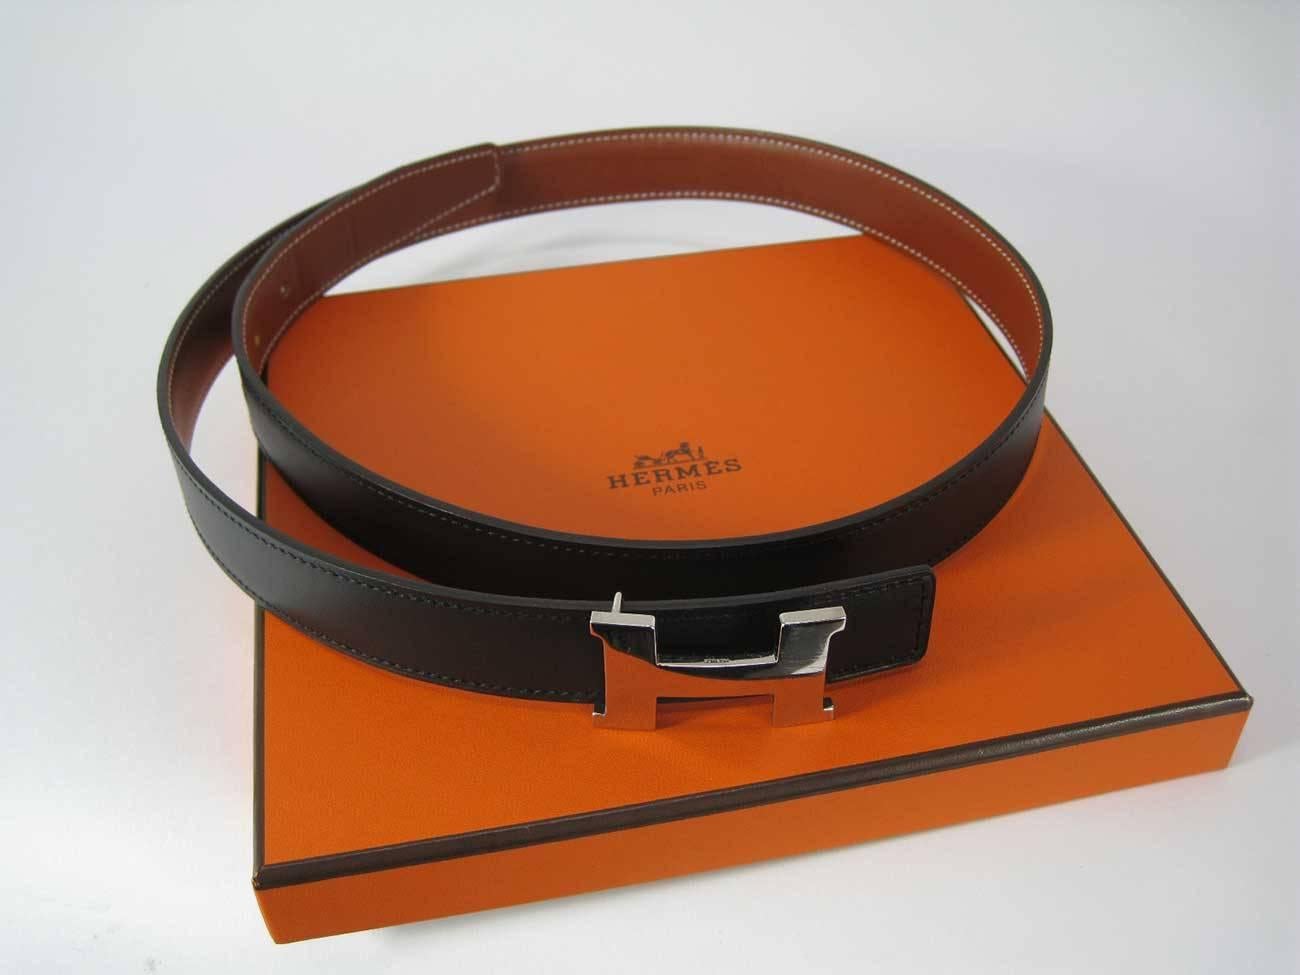 Fabulous Hermes H Belt Buckle with reversible strap.

Black and light brown leather strap with three holes for size adjustment.

Belt and buckle come with original box and packaging.

Buckle is shiny silver metal with matte back.

This item is in